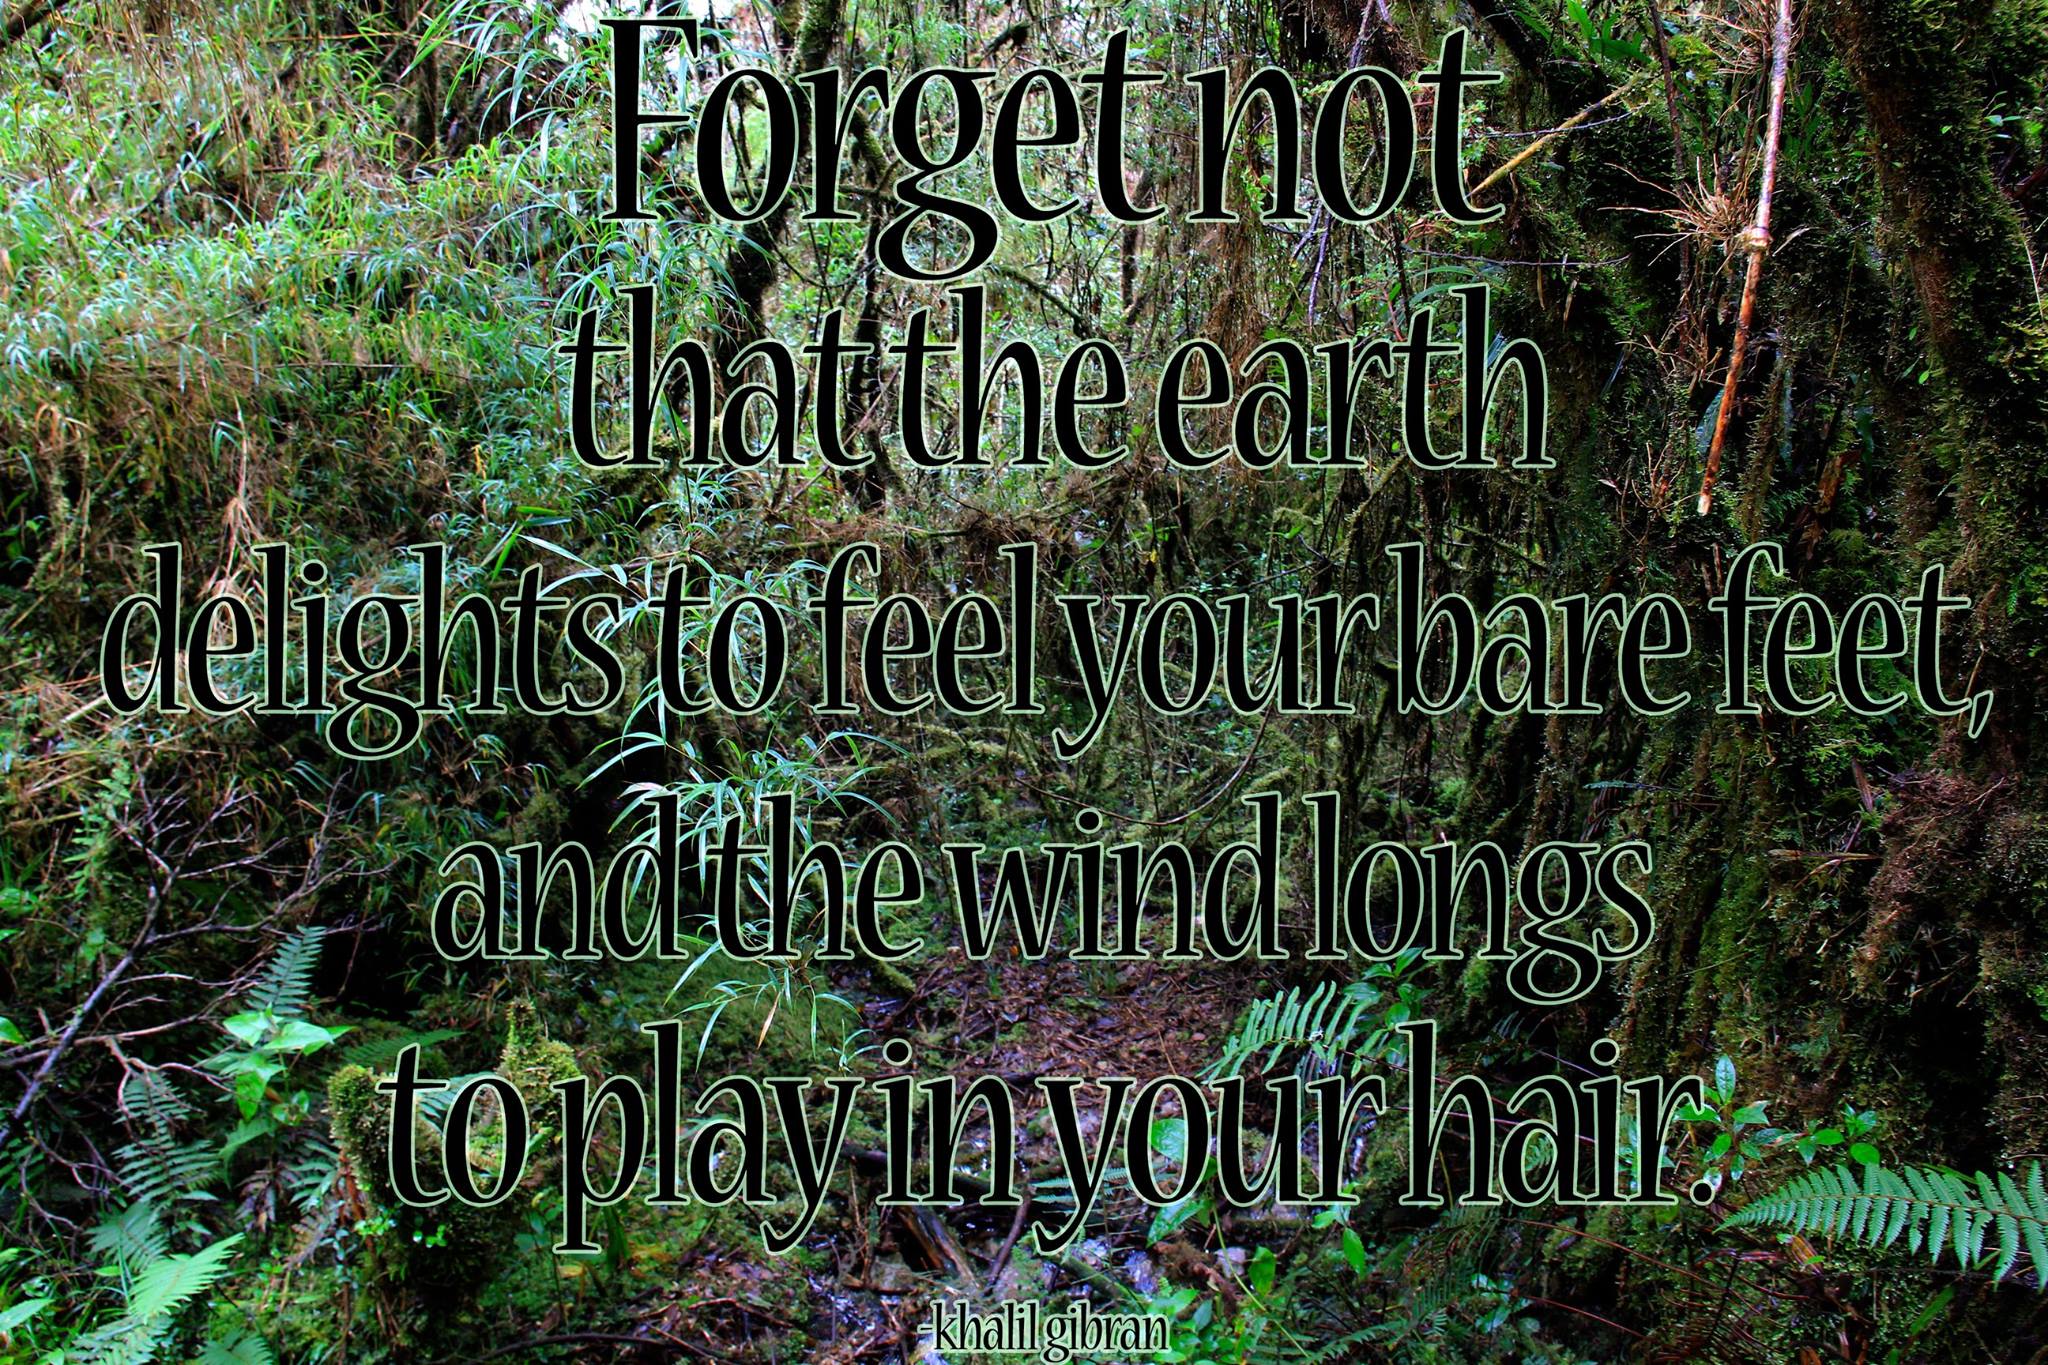 The Earth Delights To Feel Your Bare Feet